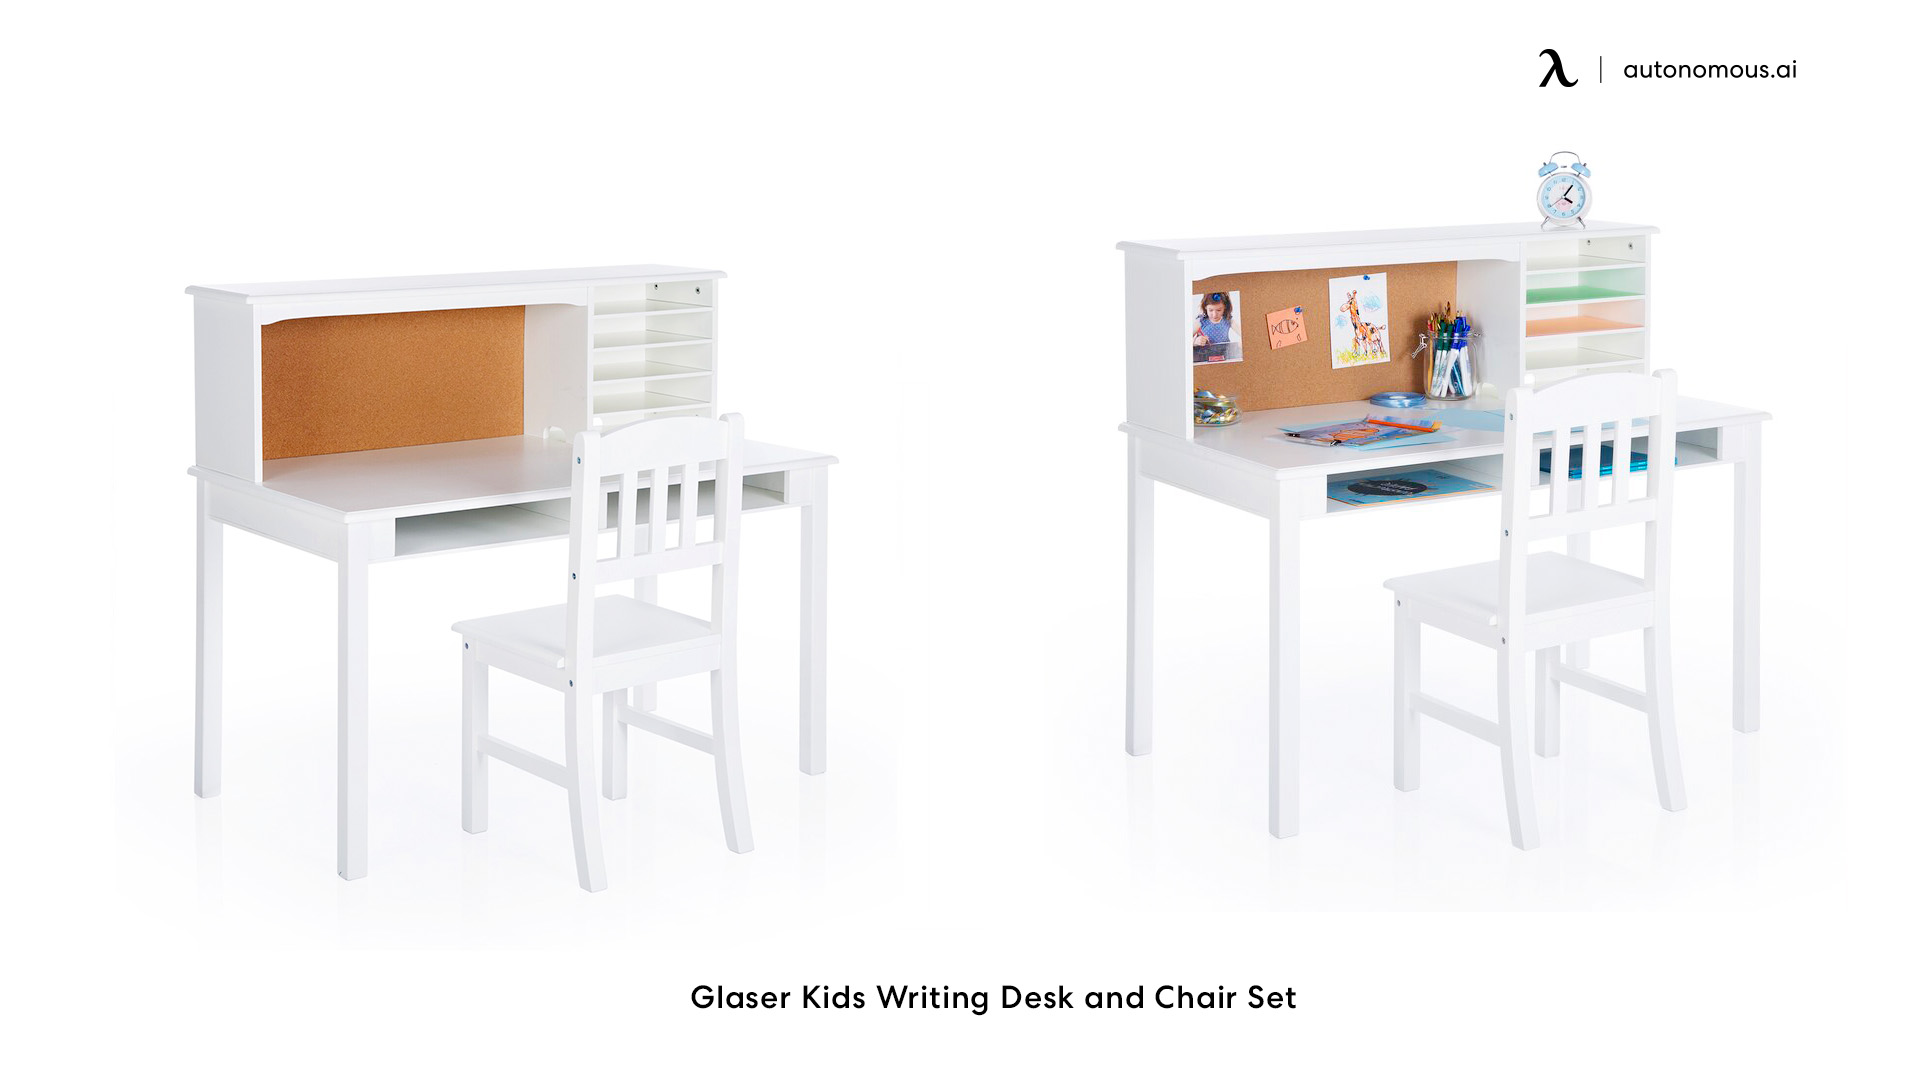 Glaser Kids Writing Desk and Chair Set